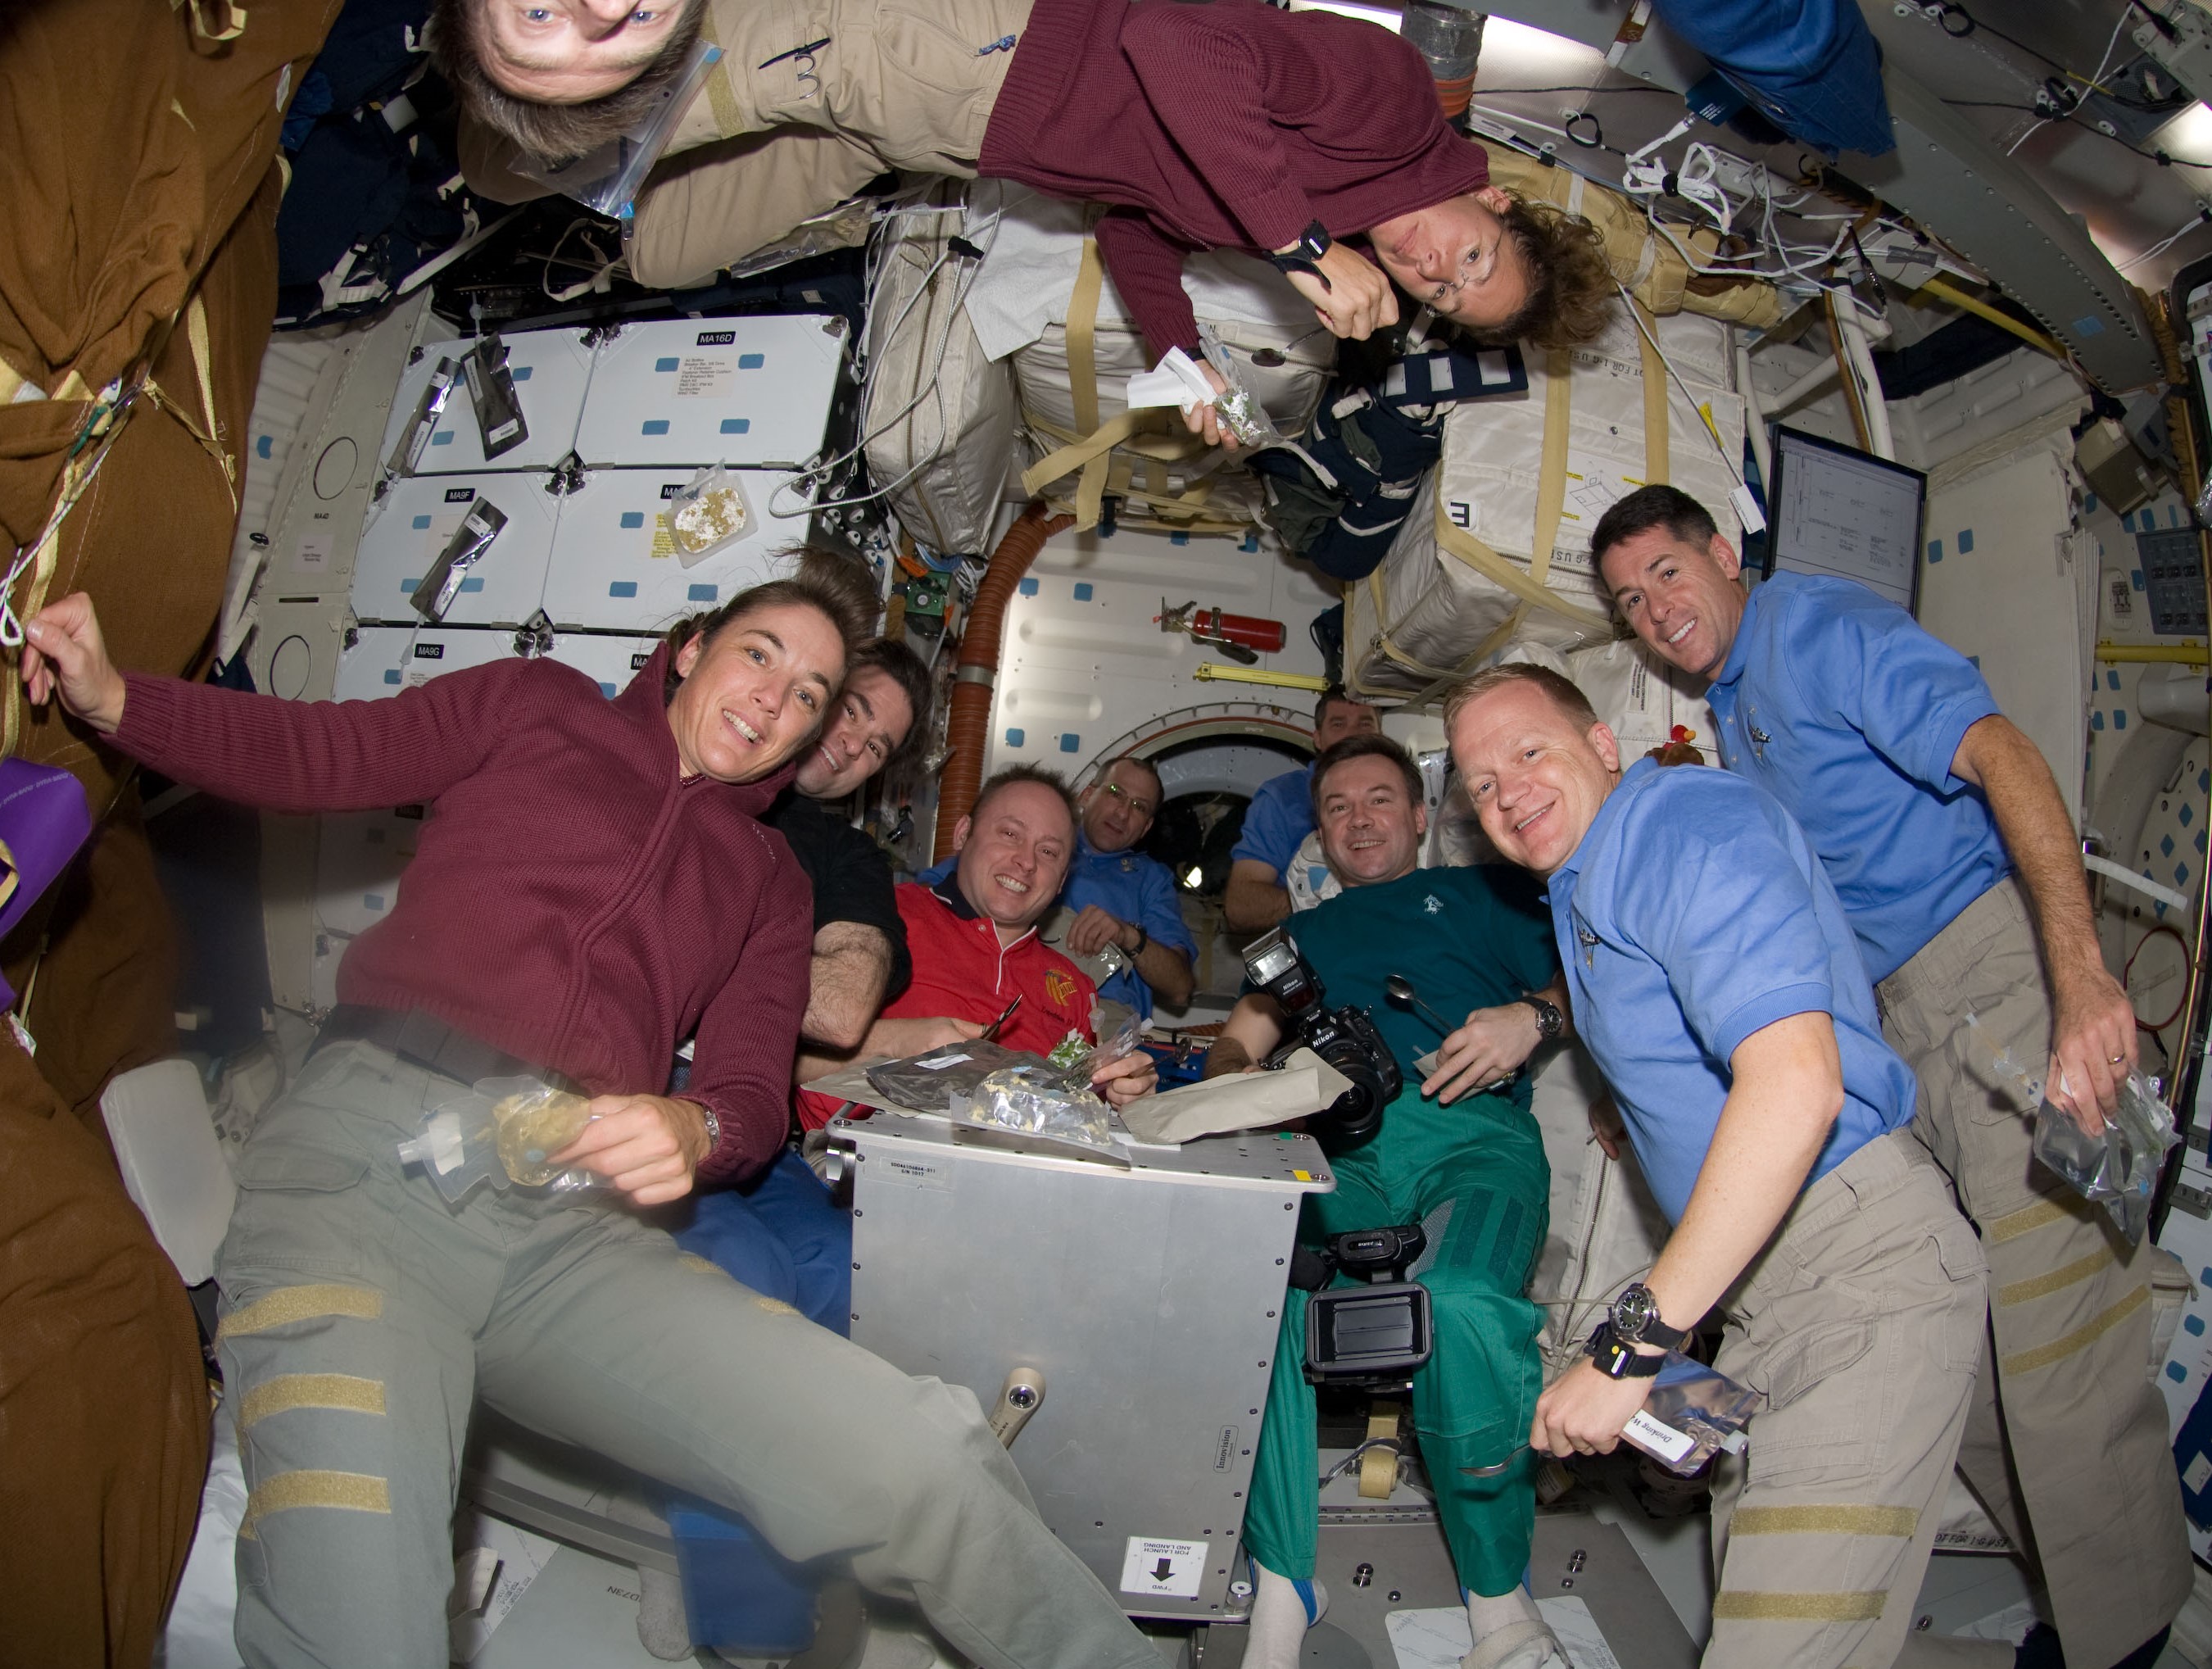 The crews of Expedition 18 and STS-126 share a meal in the space shuttle middeck